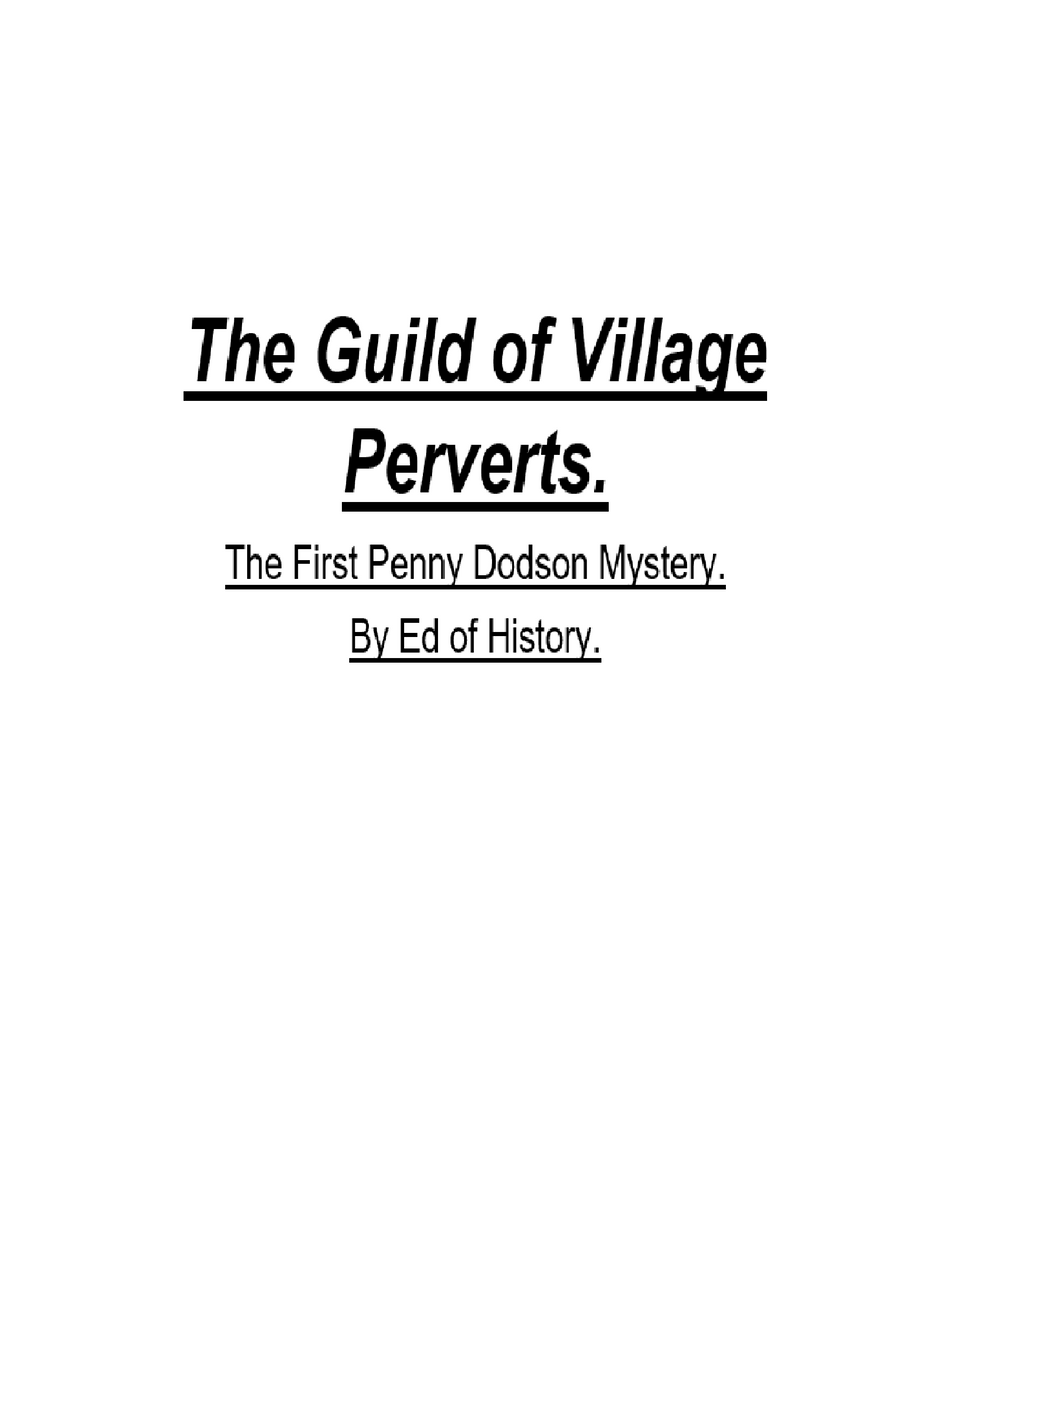 The Guild of Village Perverts